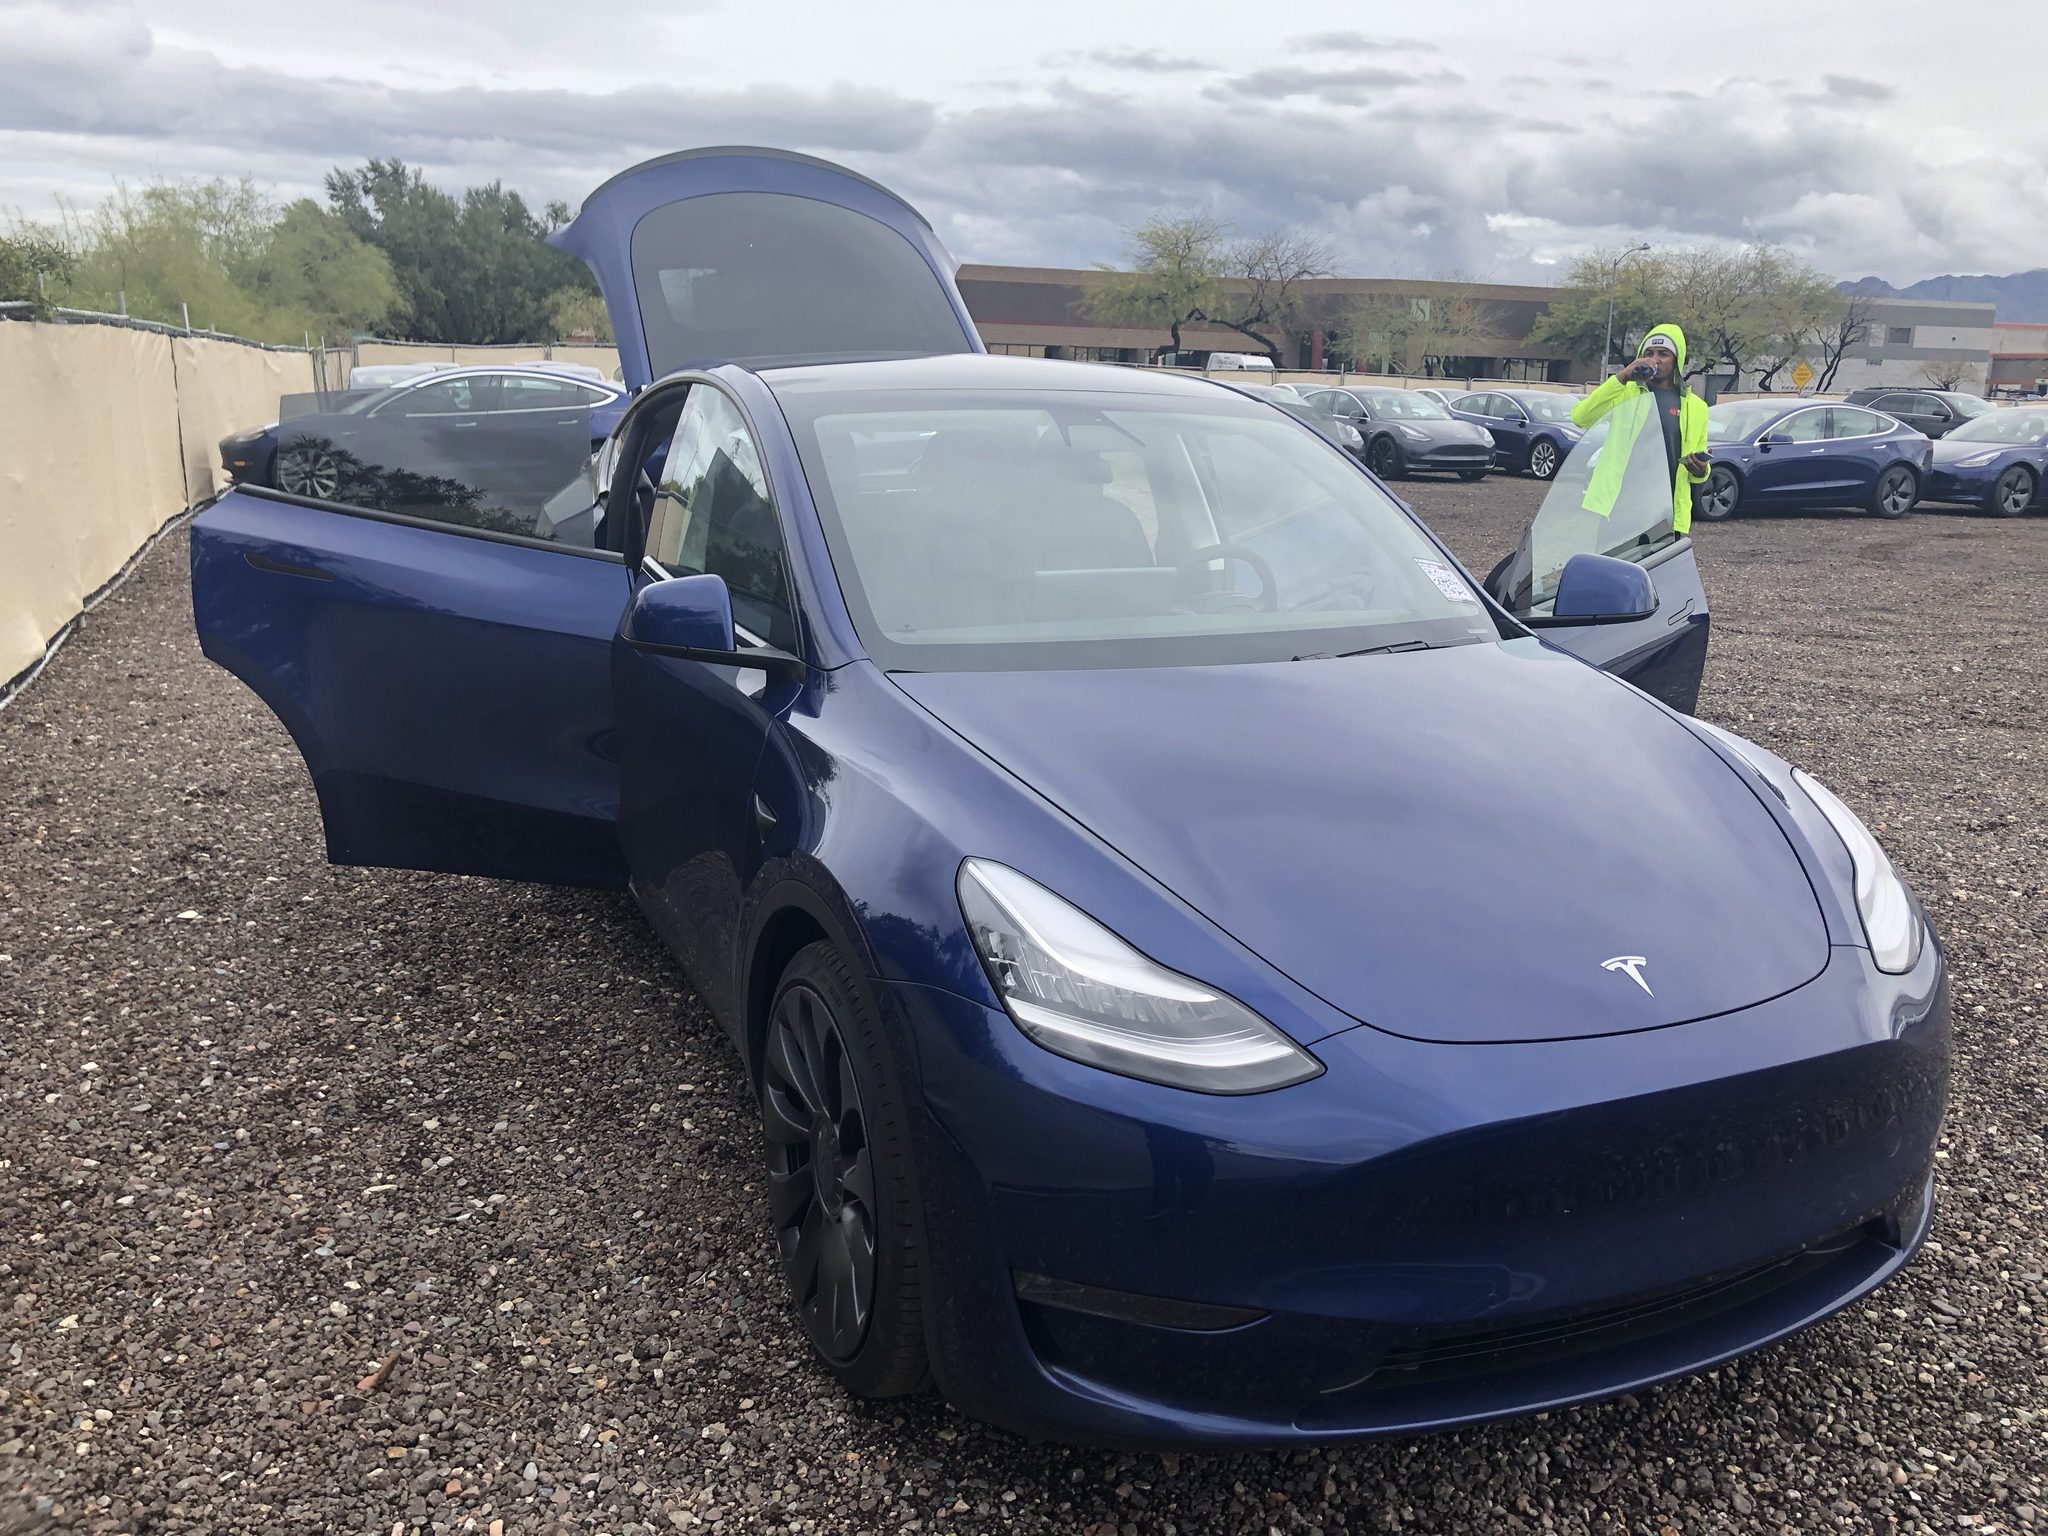 Tesla Model Y images reveal perfect design and new details